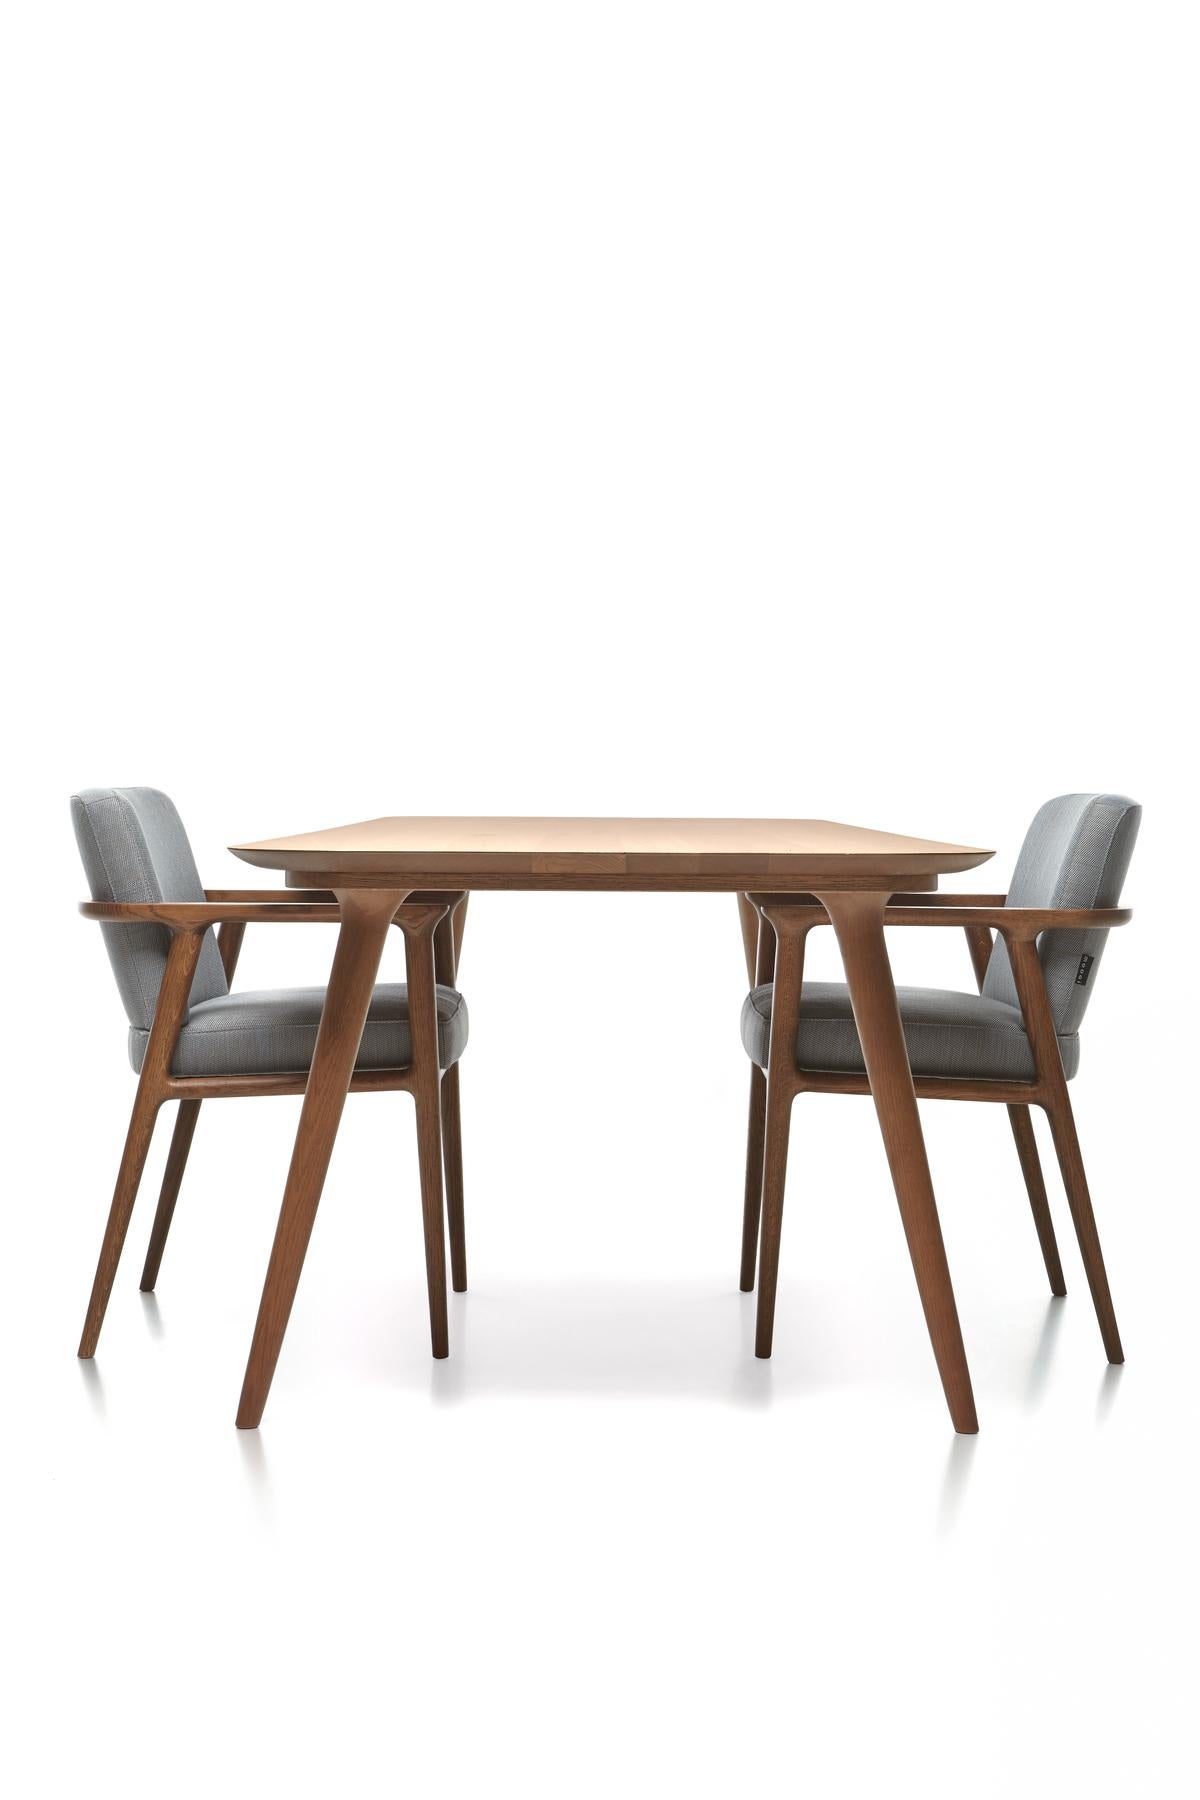 Contemporary Moooi Zio Dining Chair in Oray Ronan Upholstery with Oak Stained Cinnamon Frame For Sale